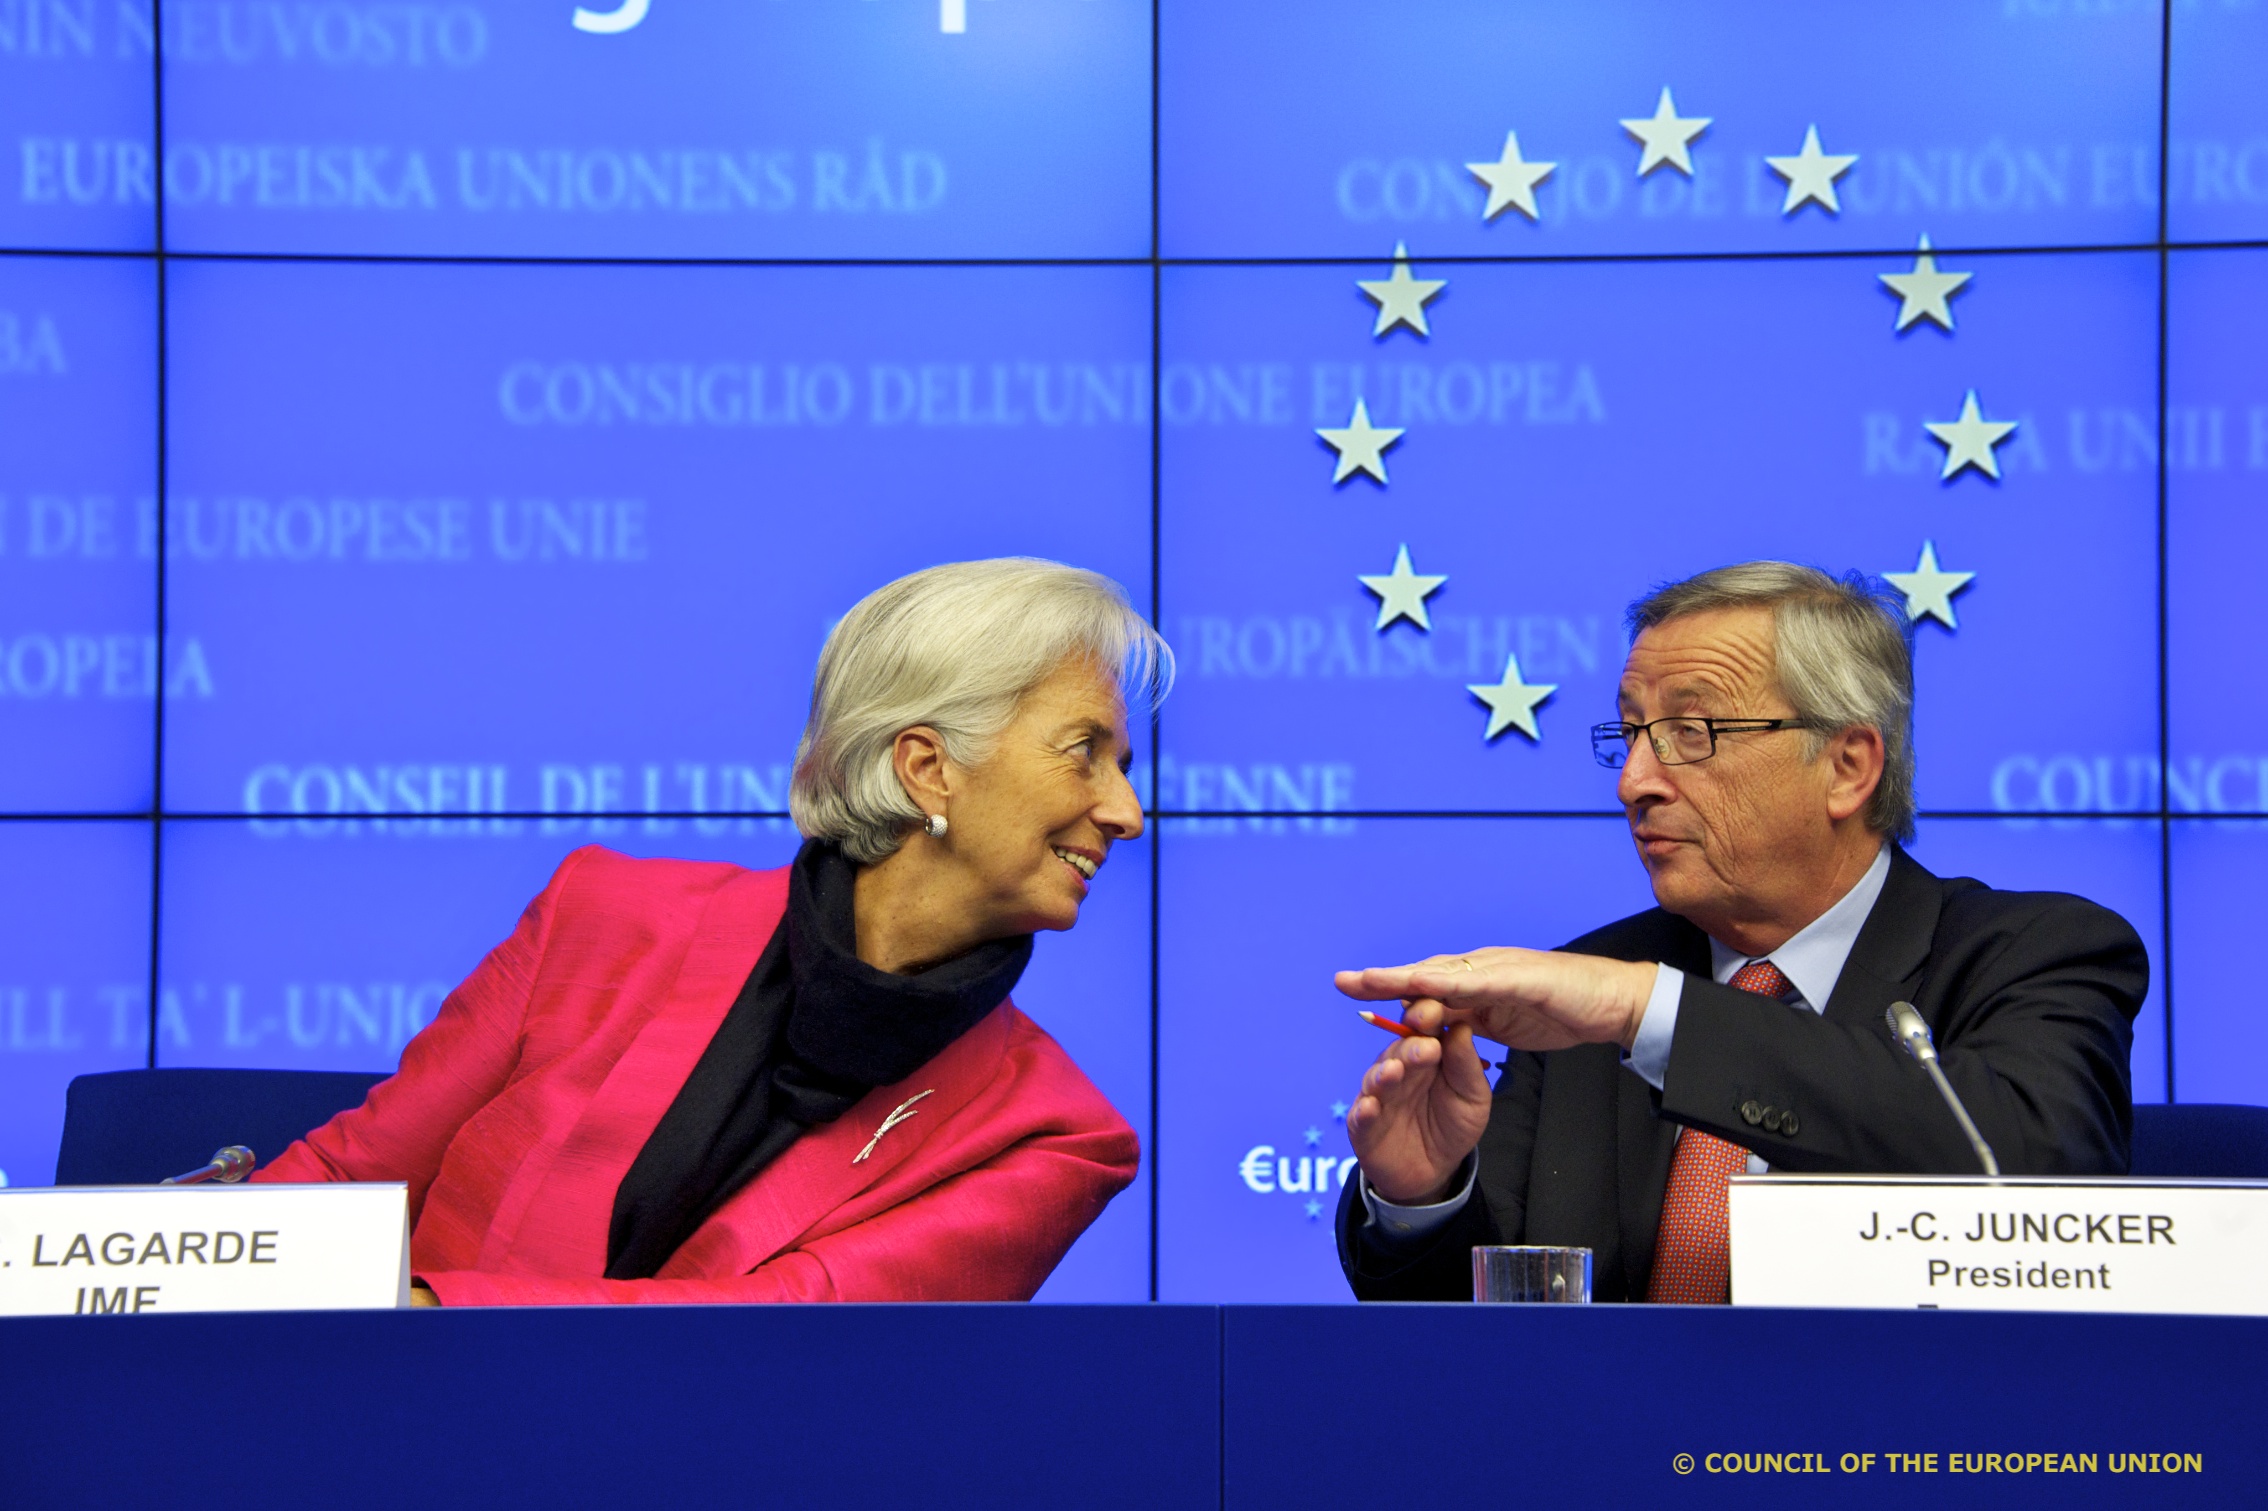 Europe and IMF offer differing proposals for Greek debt relief